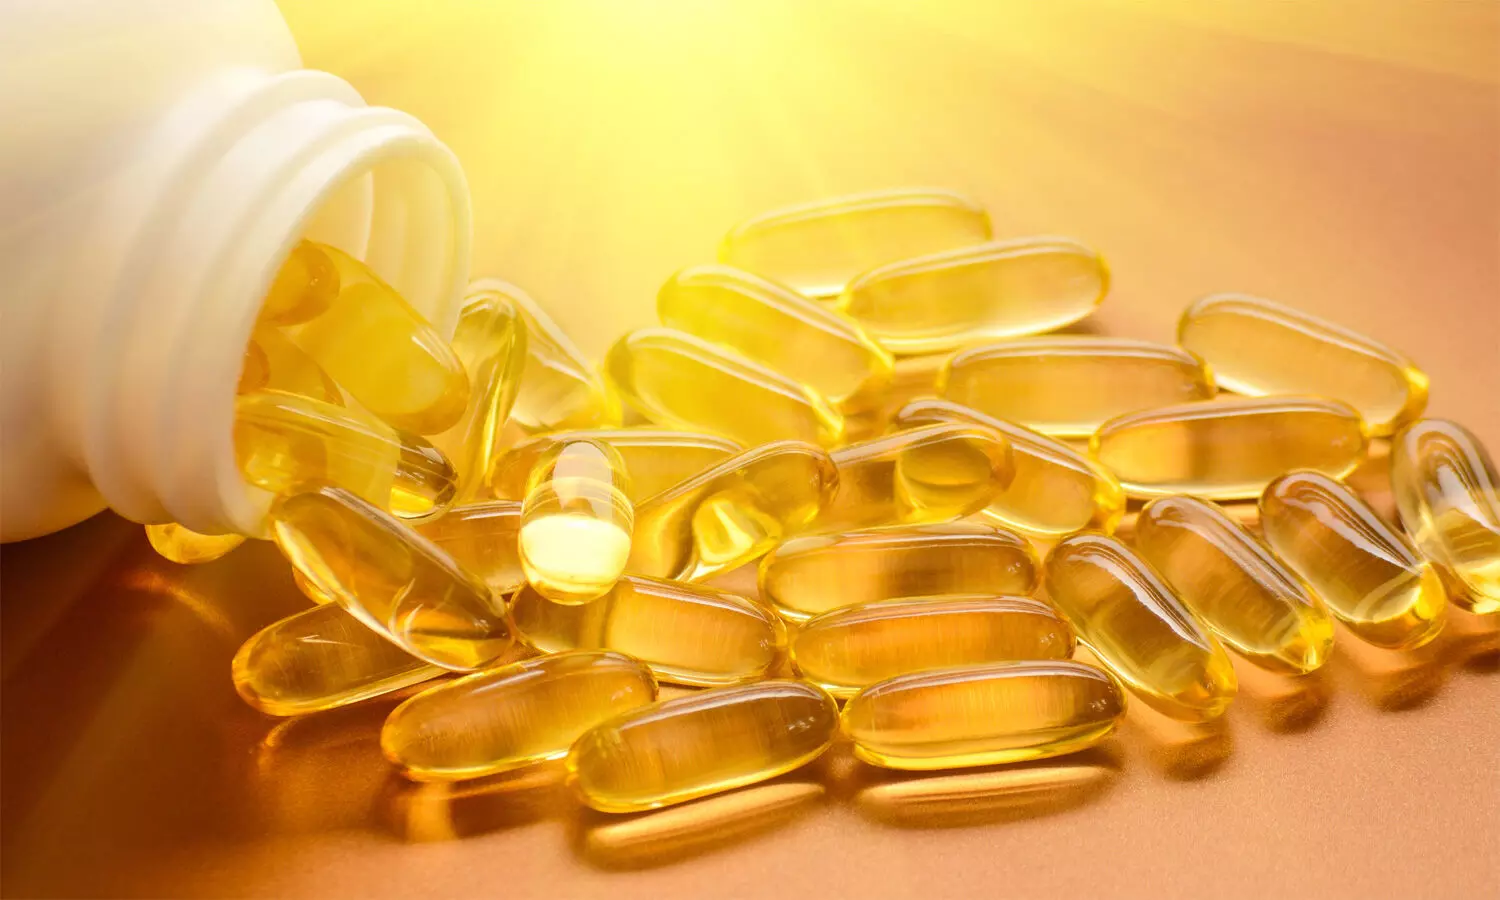 High-dose vitamin D supplementation for five years fails to affect incidence of CVD or cancer